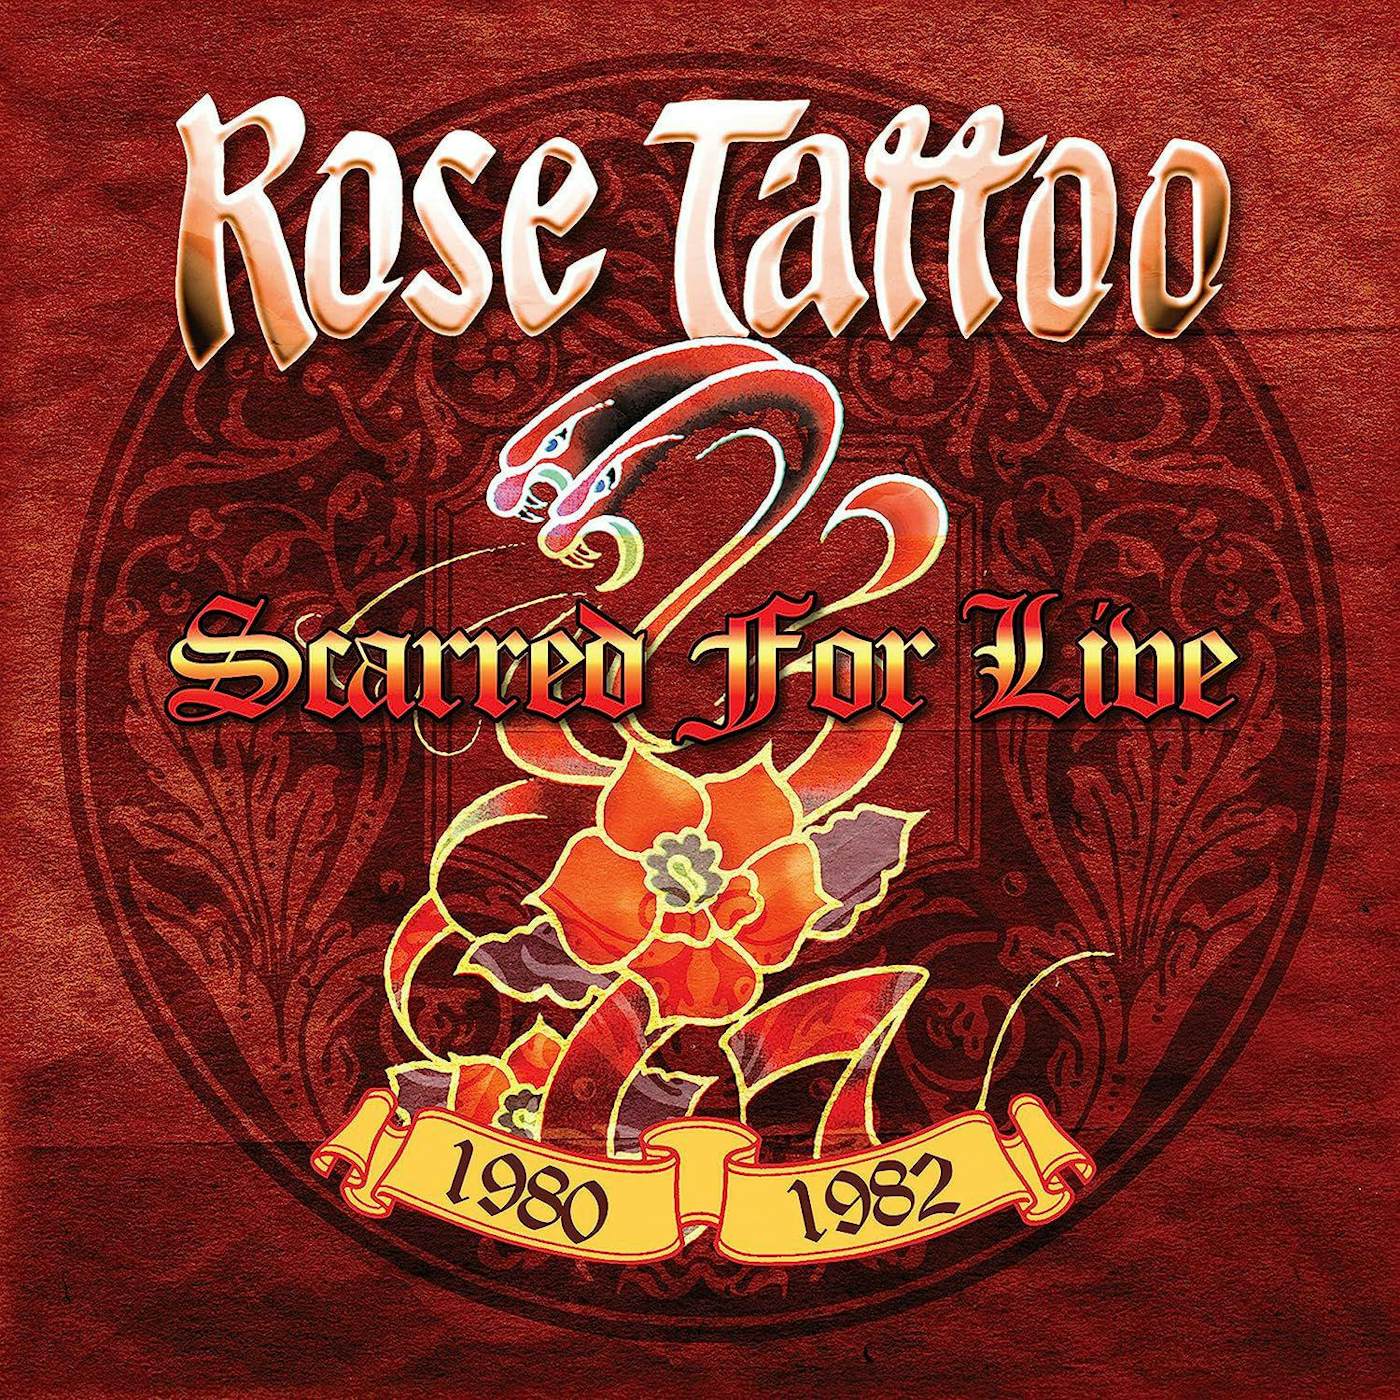 Rose Tattoo Scarred For Life (Silver) Vinyl Record